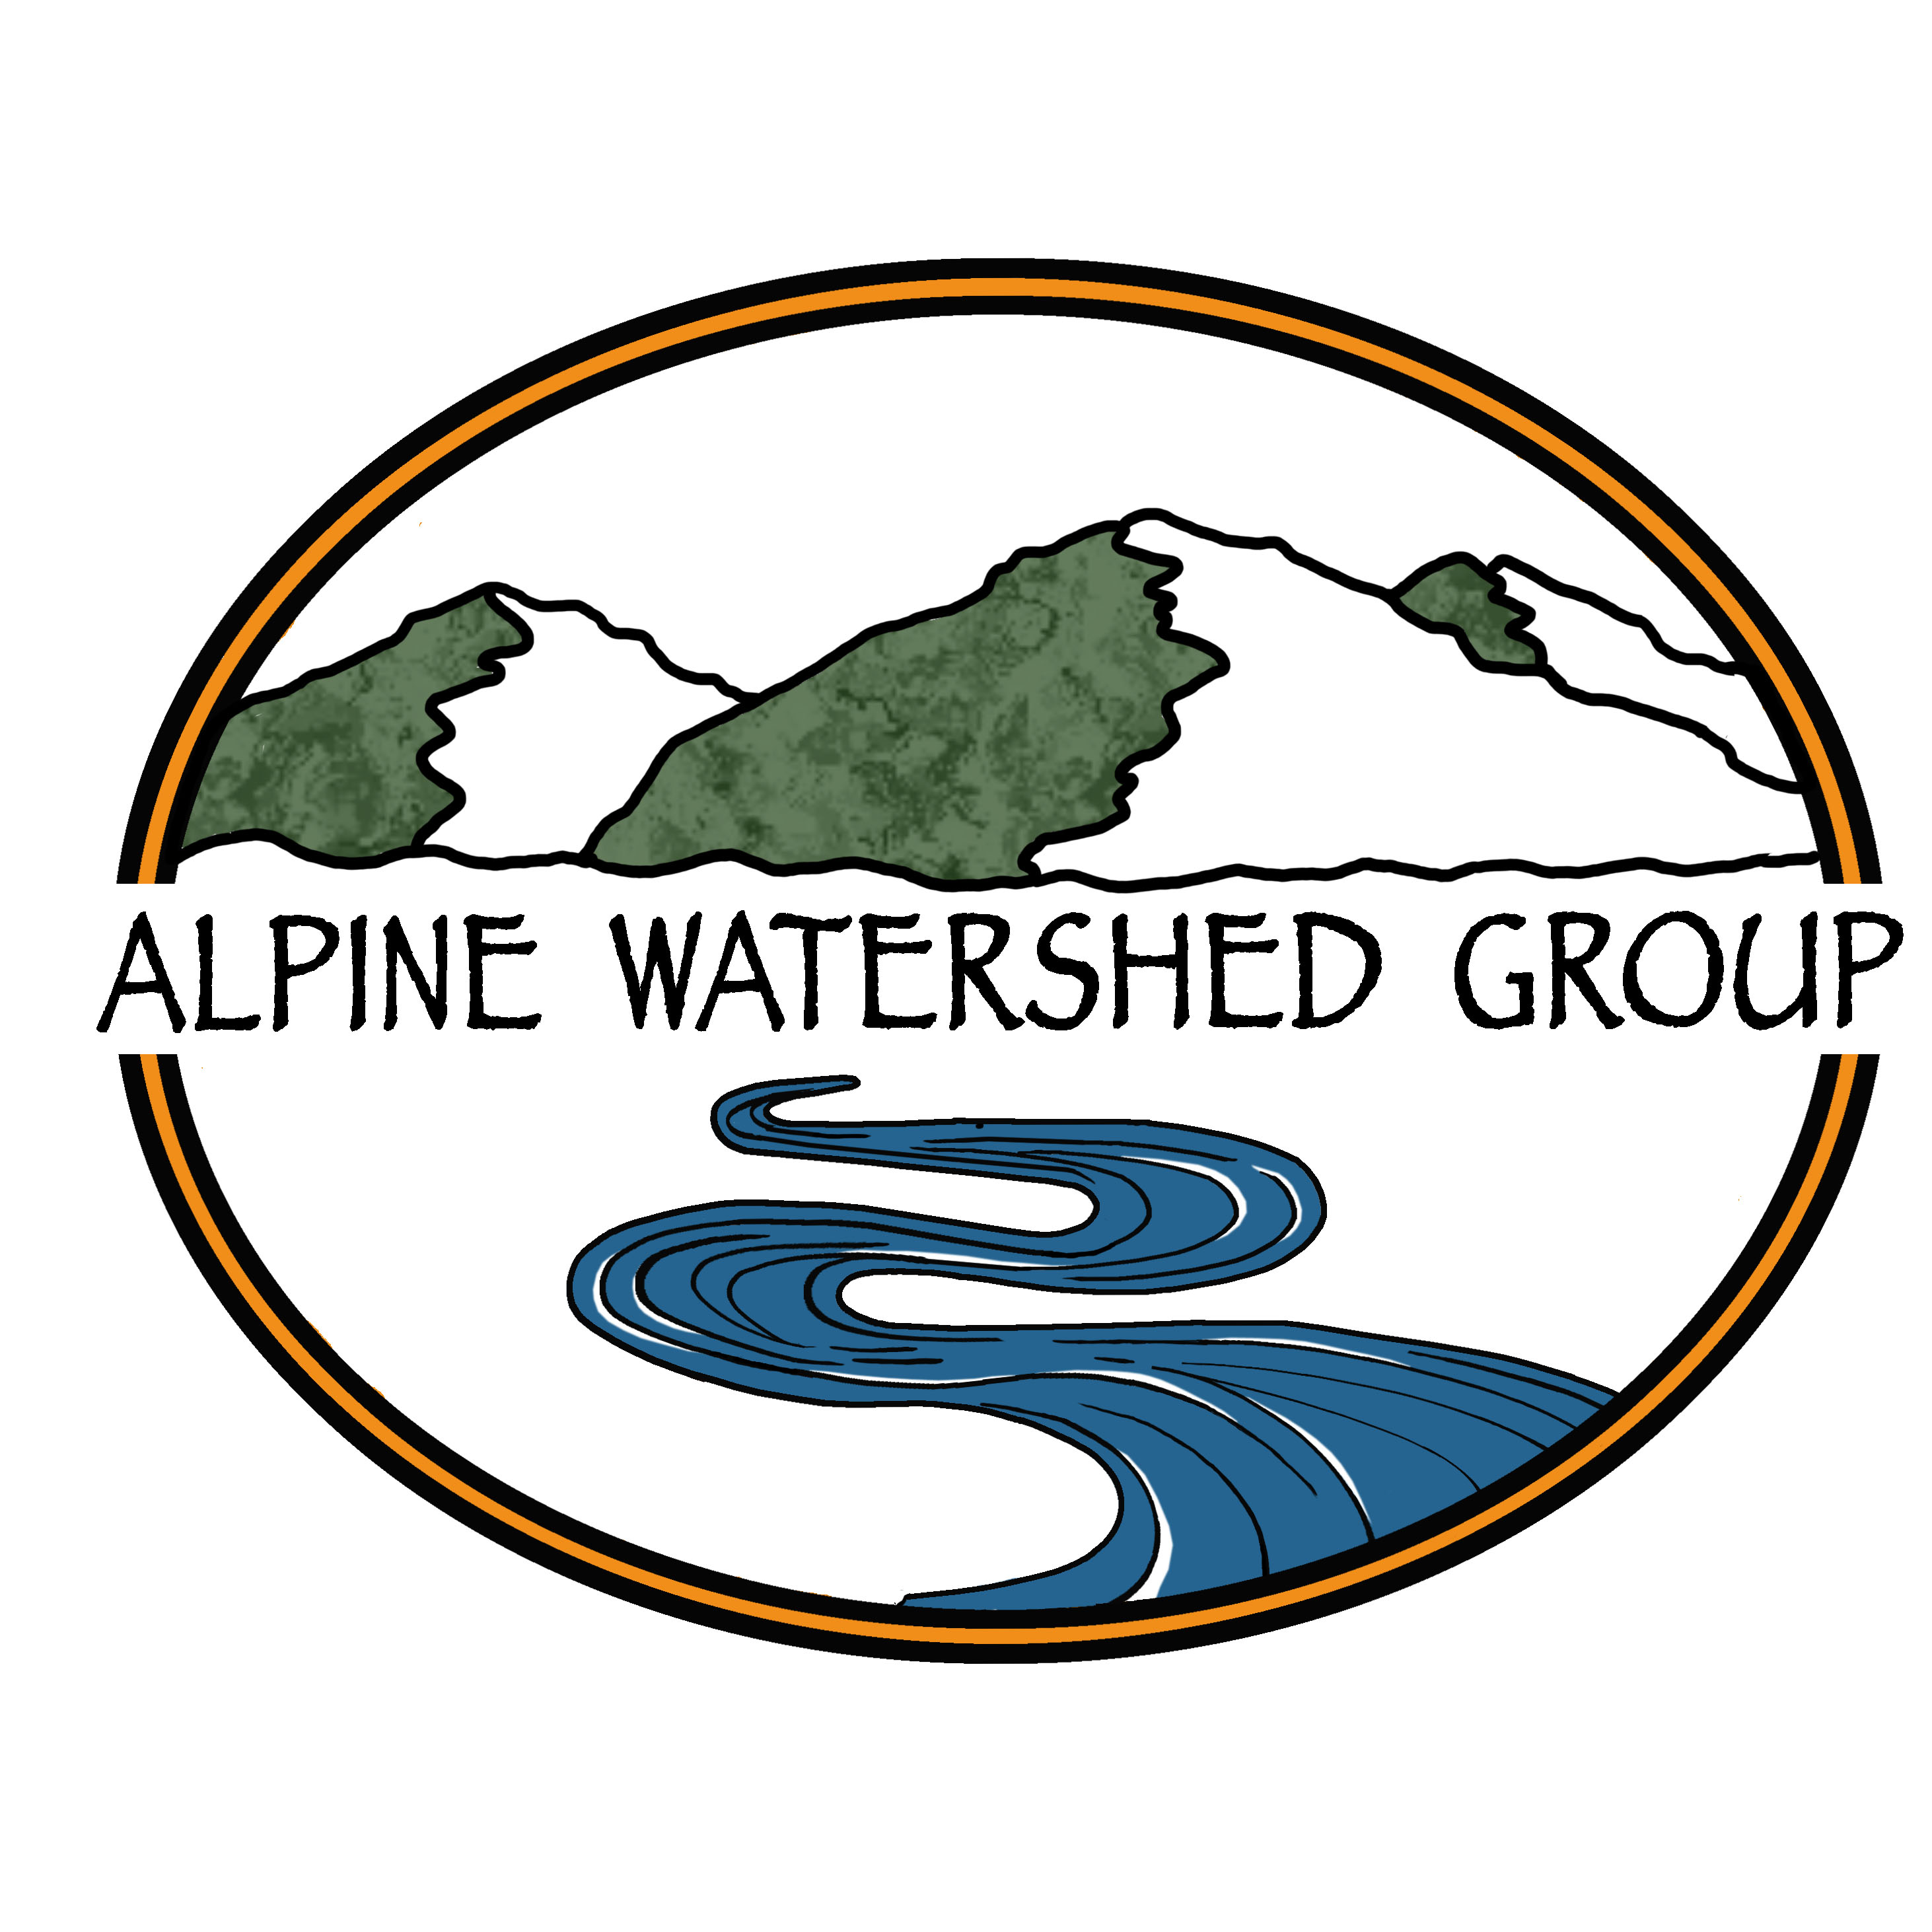 Alpine Watershed Group